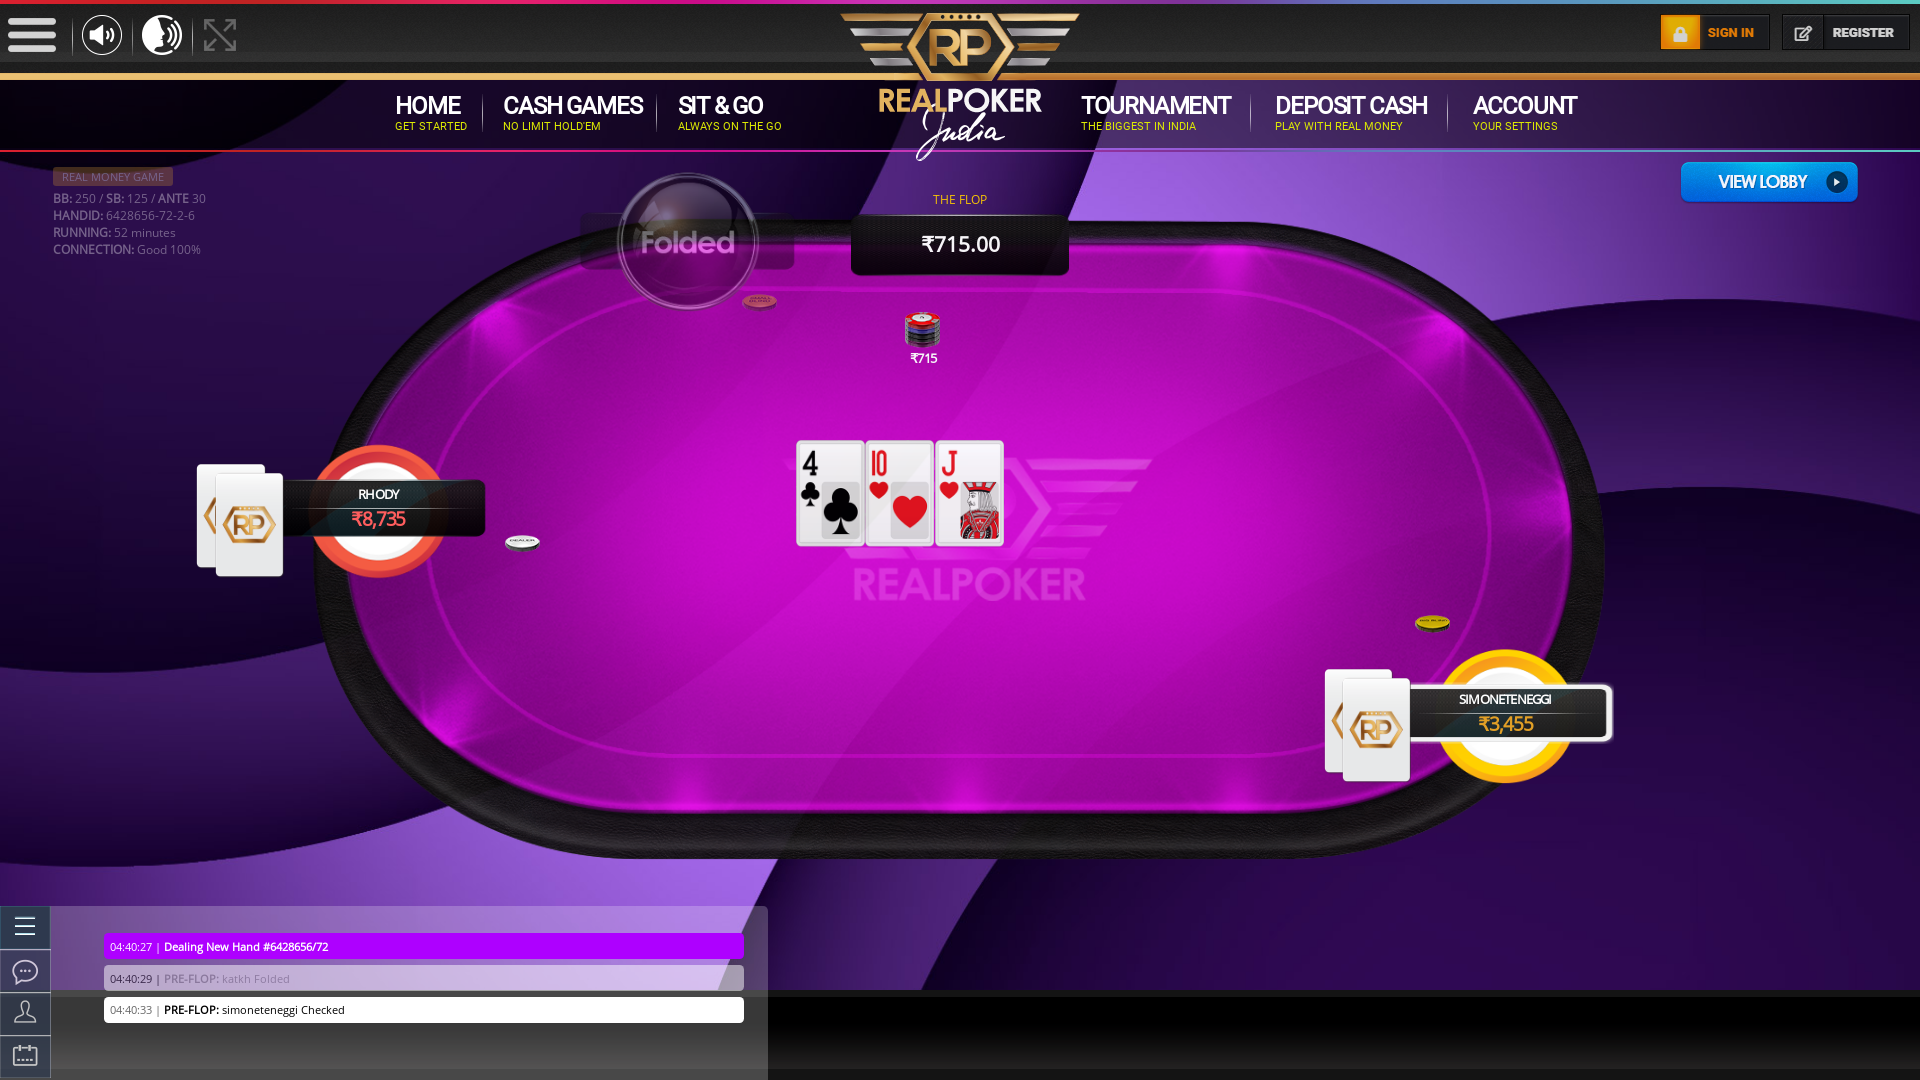 Real indian poker on a 10 player table in the 52nd minute of the game